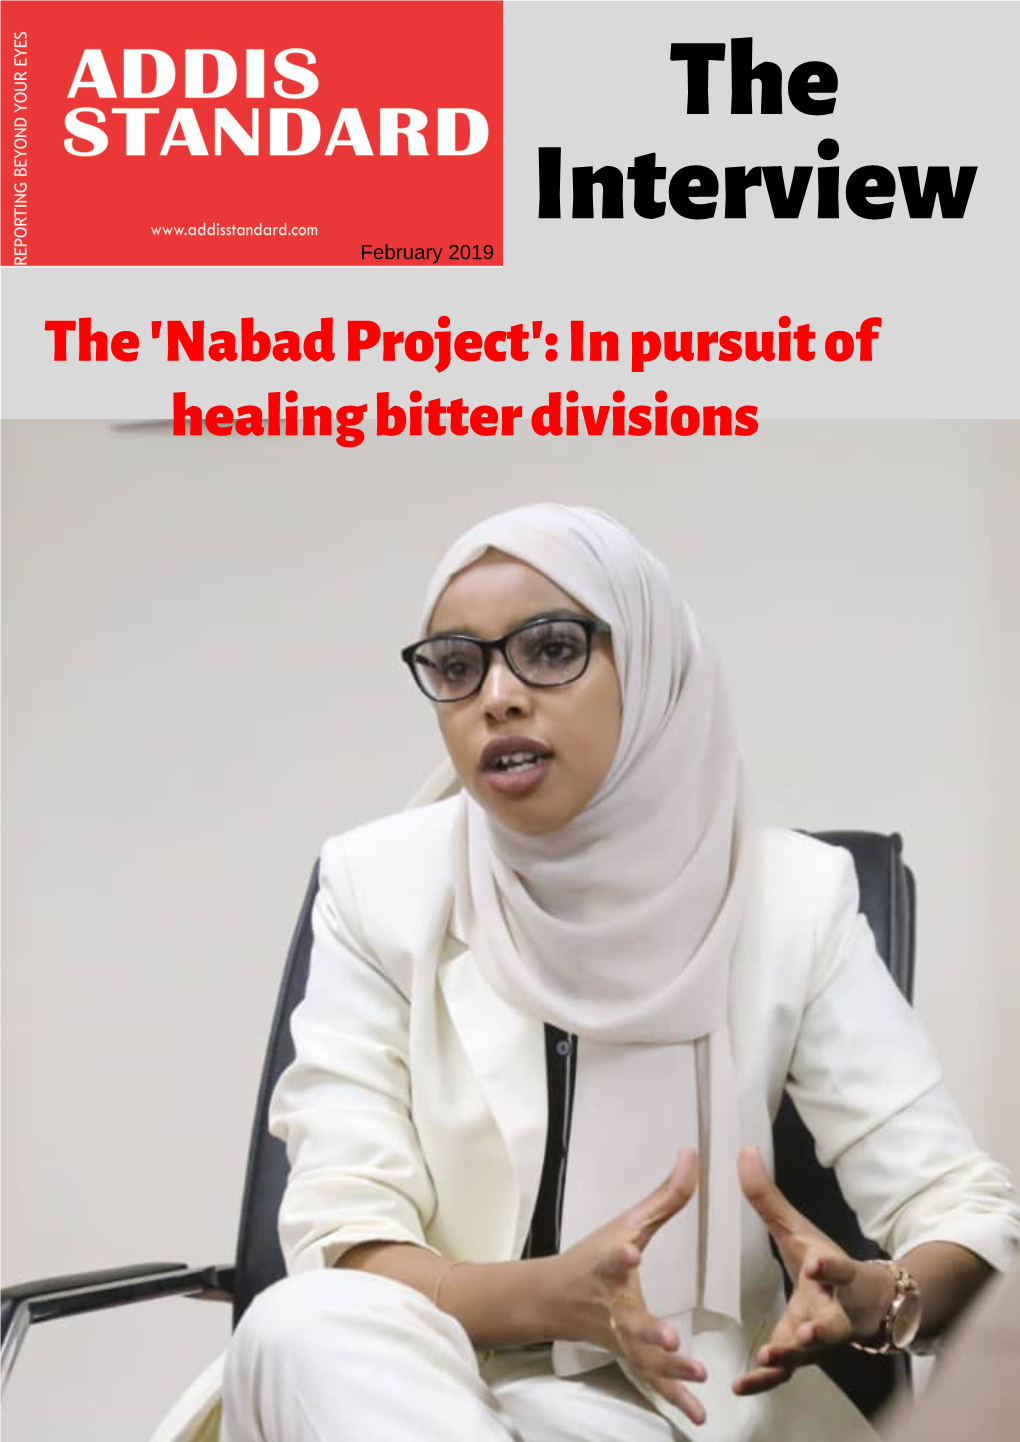 The Interview February 2019 the 'Nabad Project': in Pursuit of Healing Bitter Divisions 'The Peace Engineers'